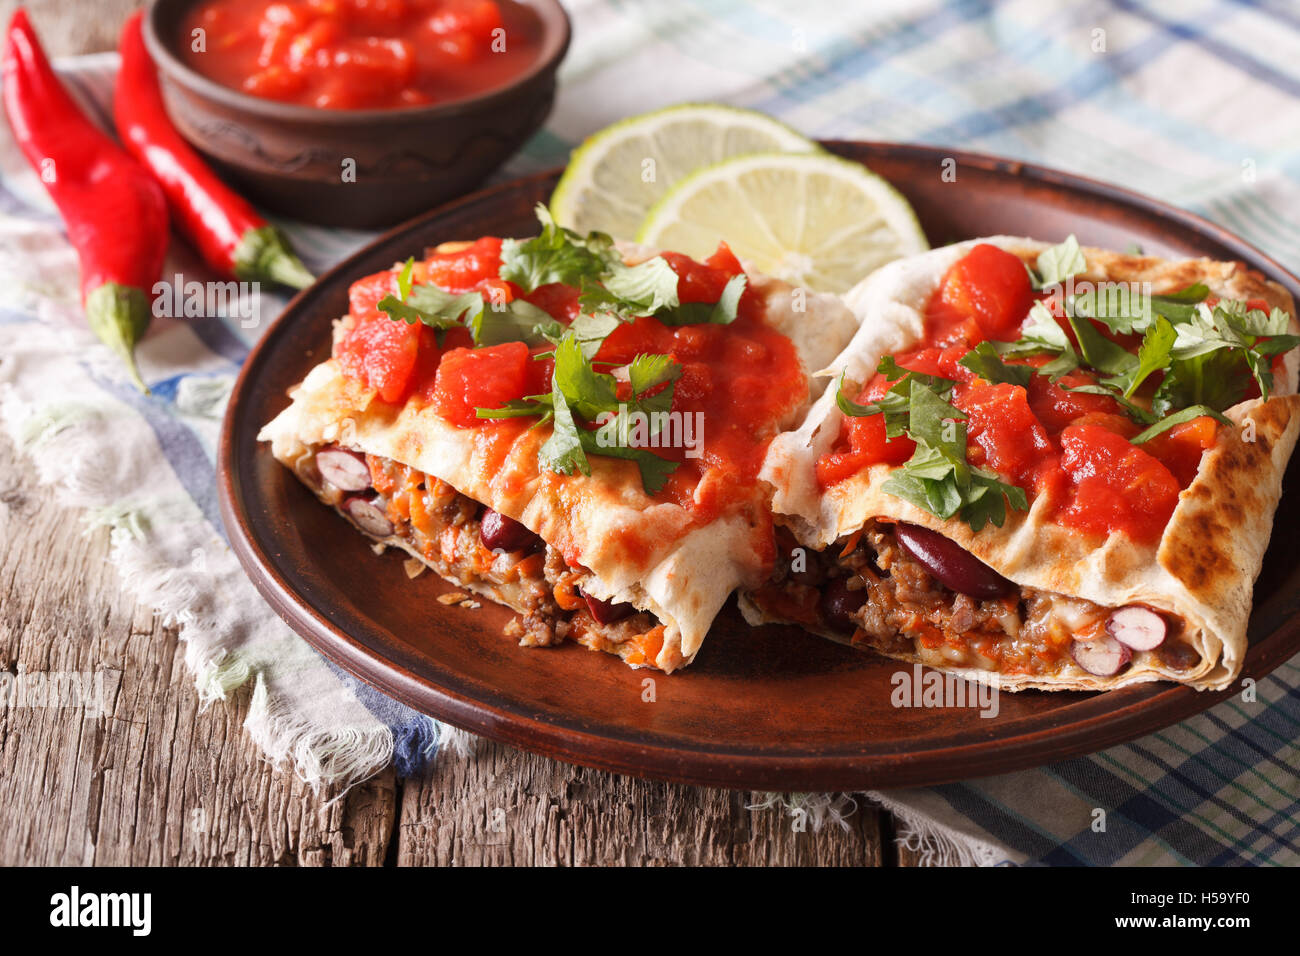 Mexican chimichanga with meat, vegetables and cheese on a plate close-up horizontal Stock Photo